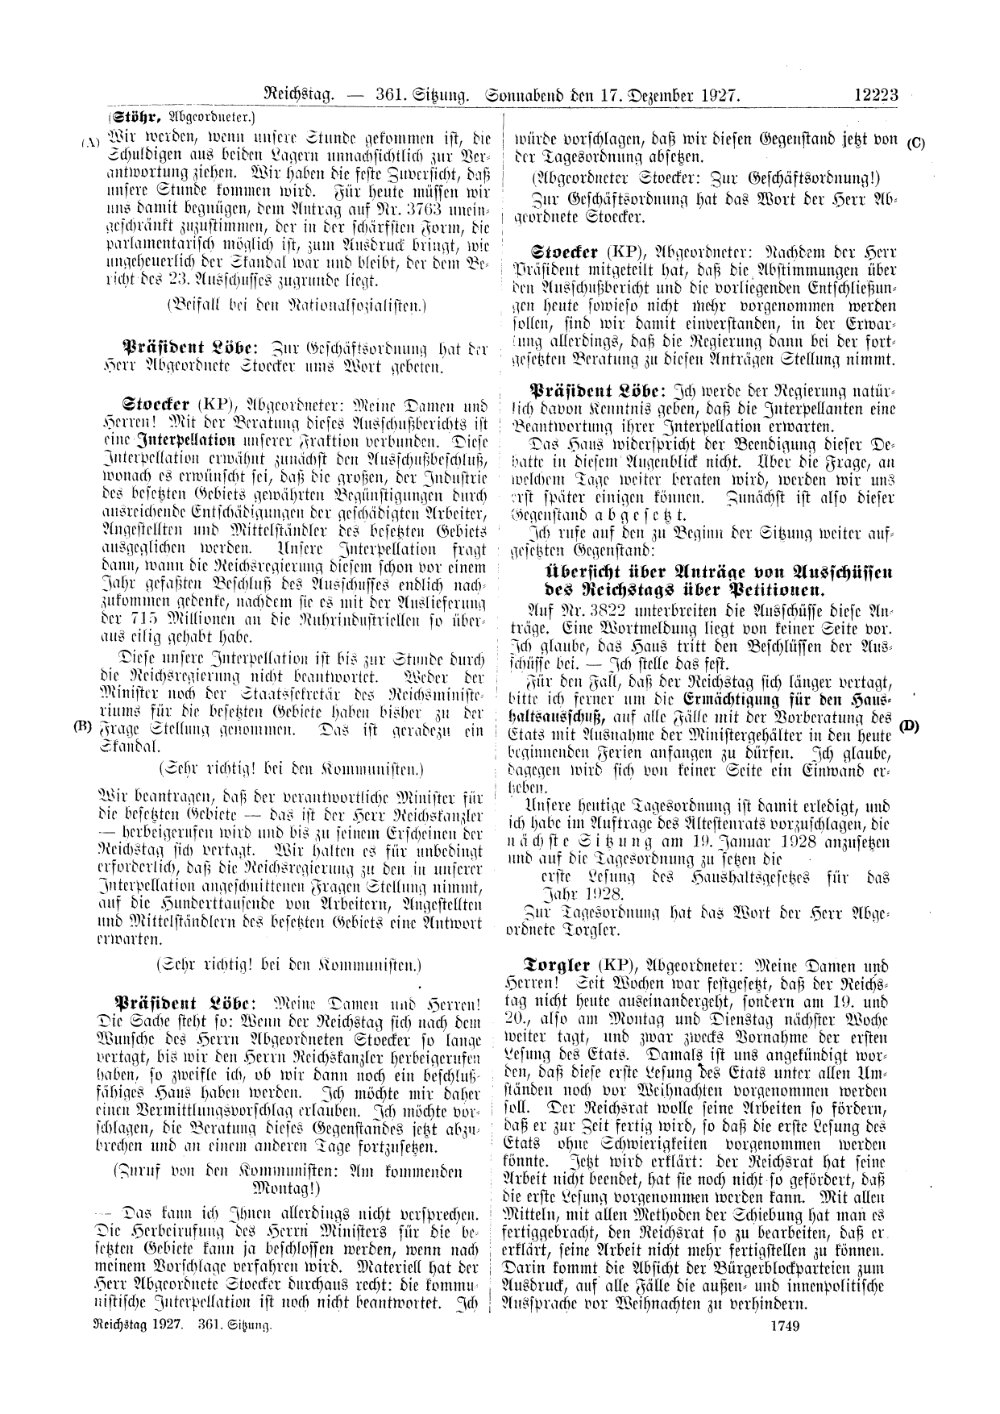 Scan of page 12223